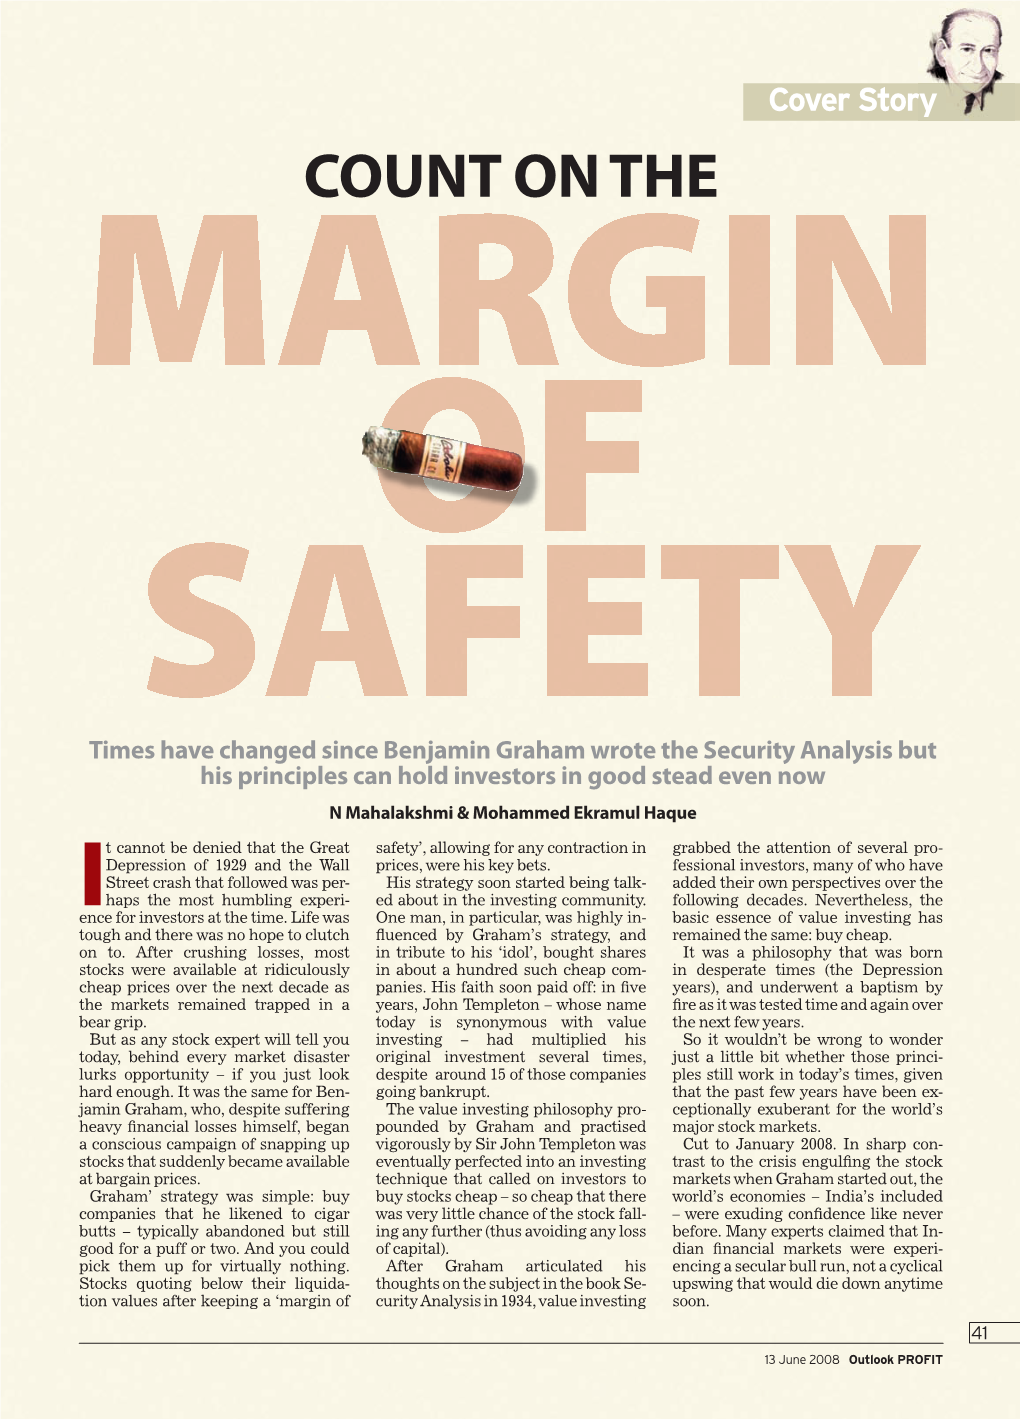 Count on the Margin of Safety